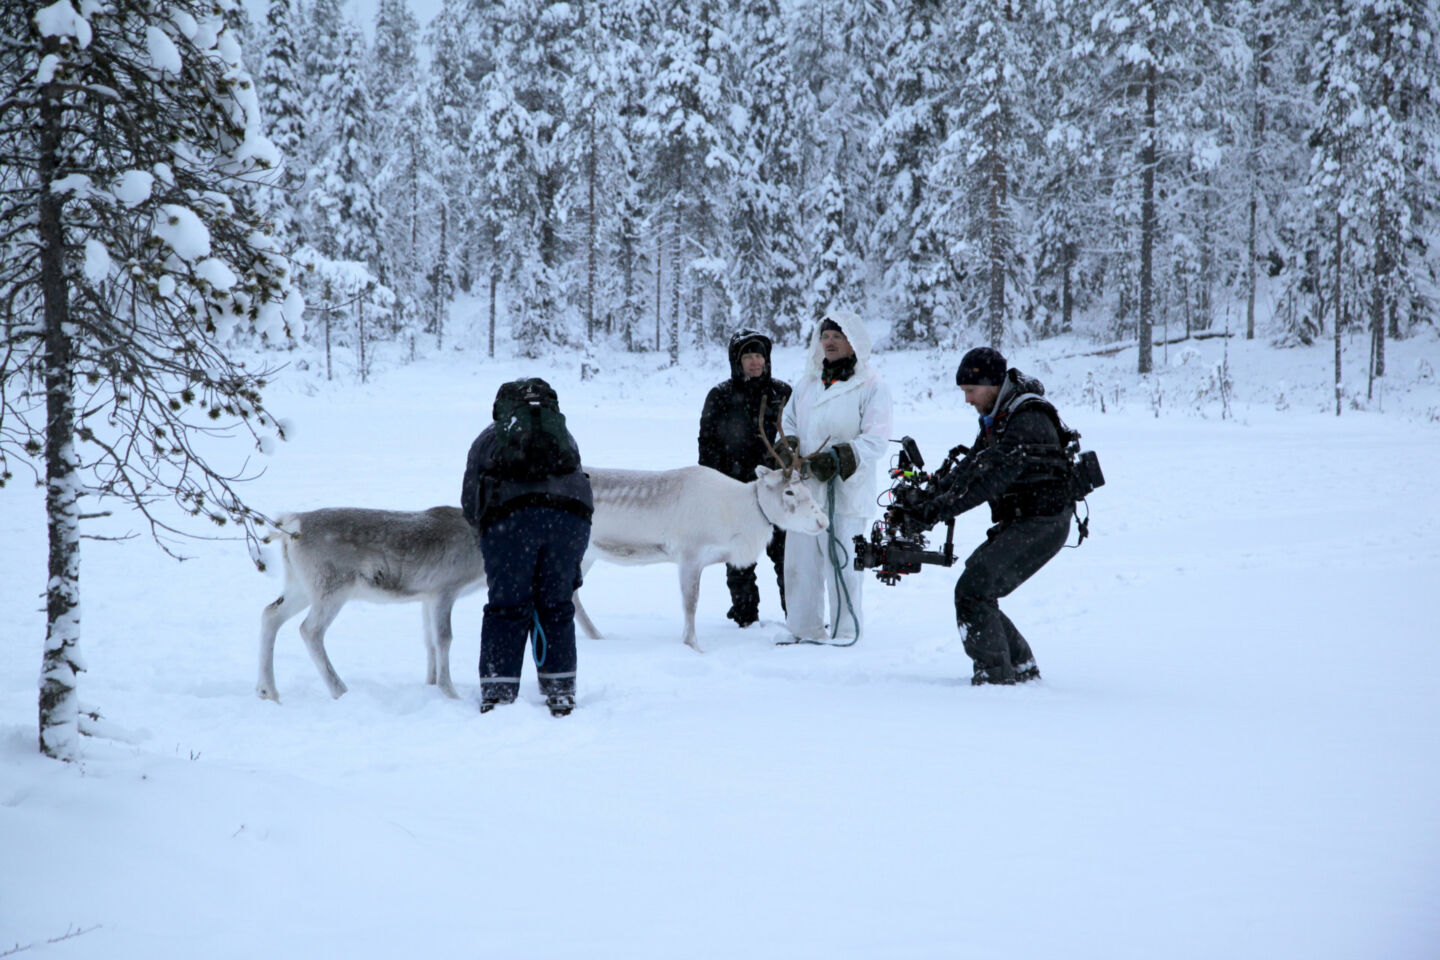 Film production services, even in wilderness locations in Finnish Lapland